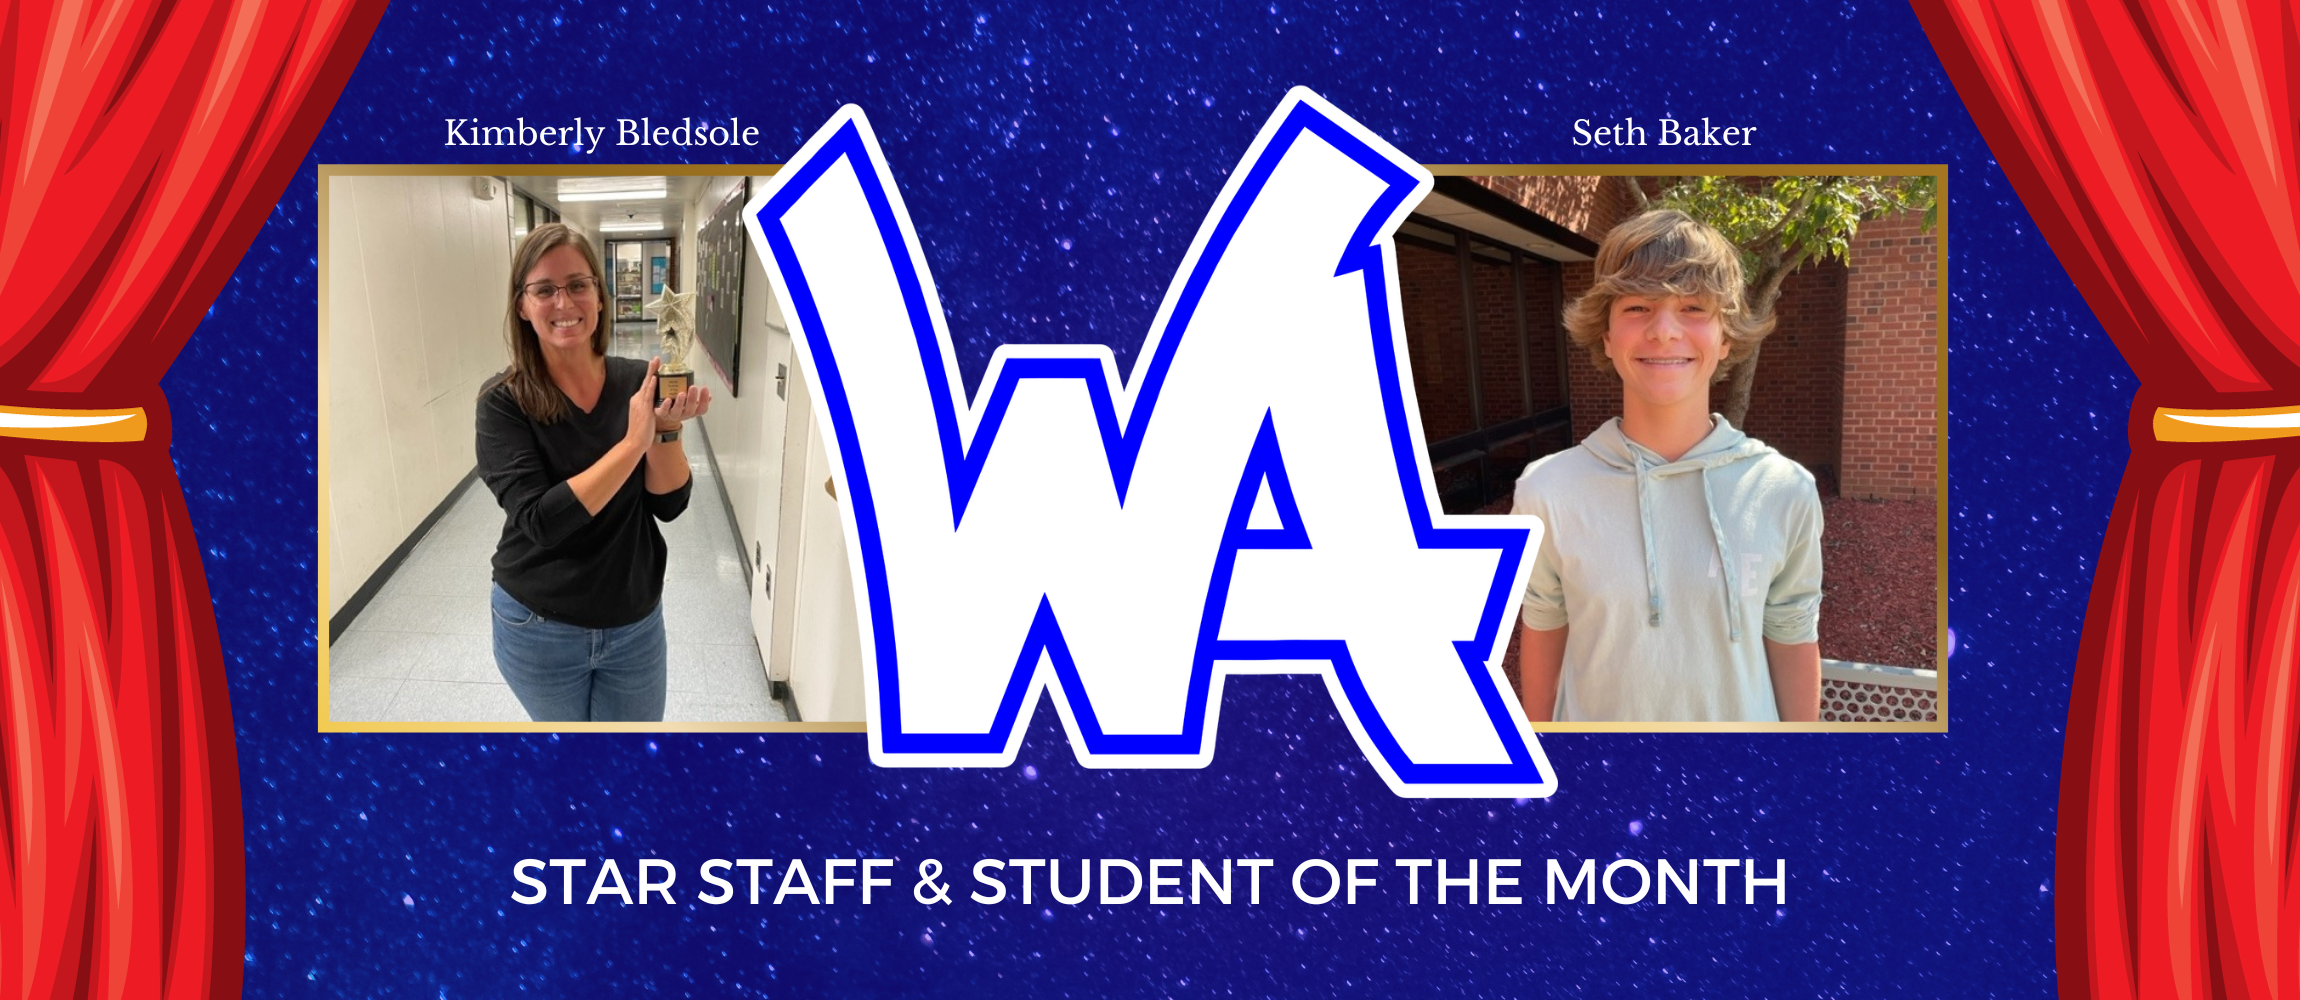 Star Staff and Student recognition banner